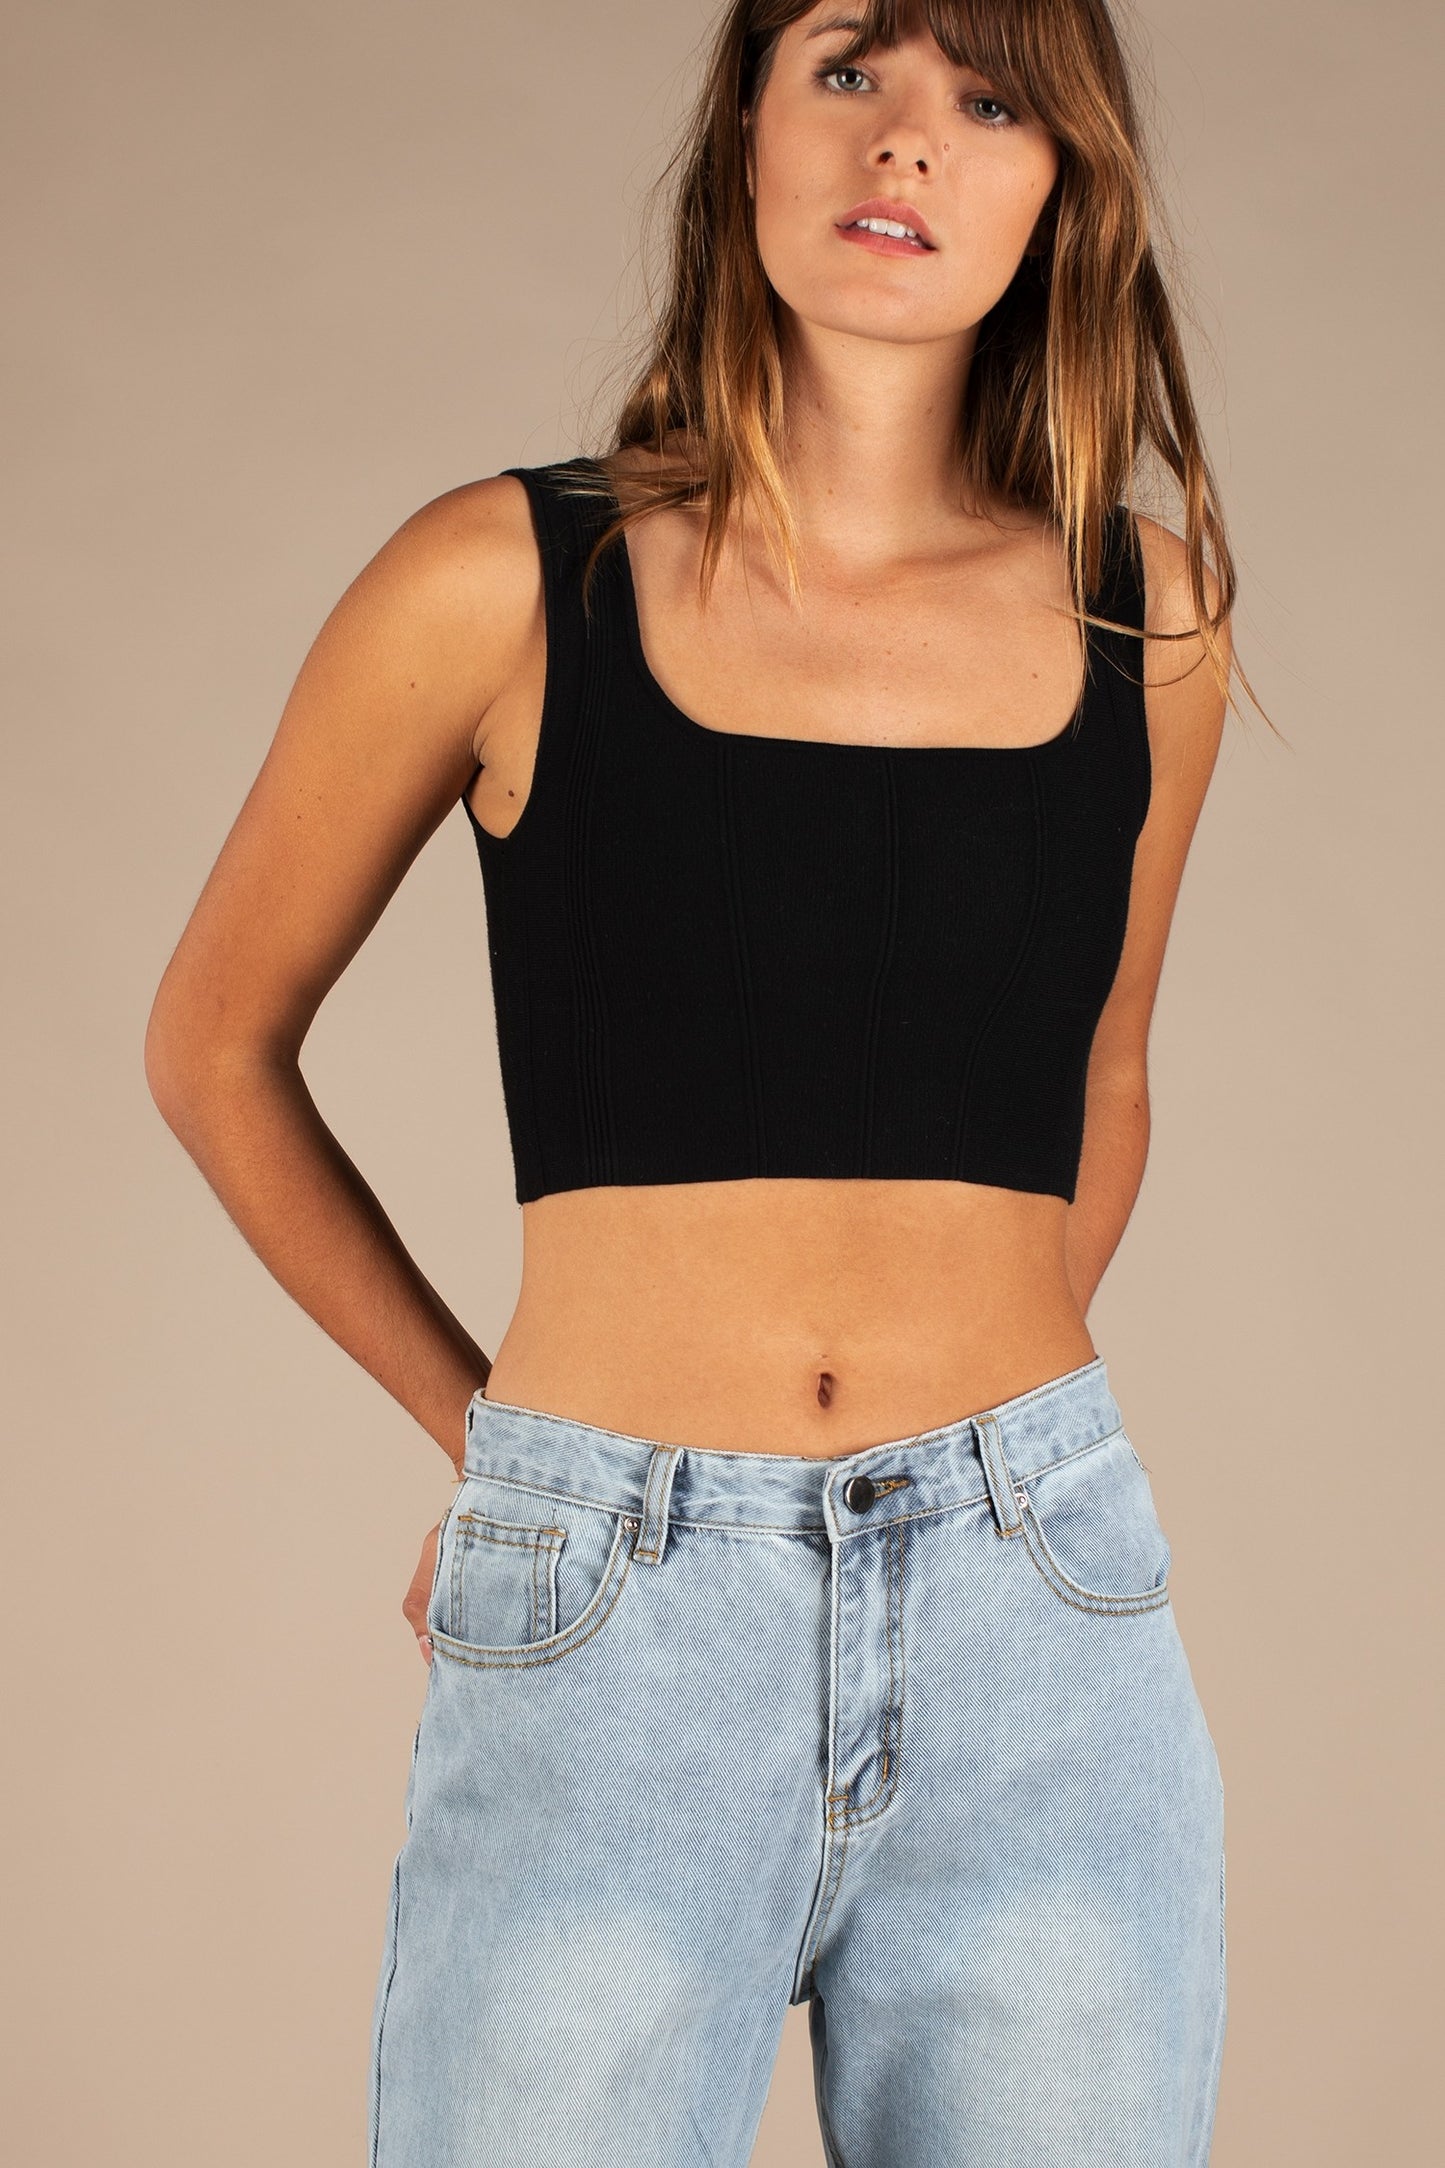 All : Row, The Millie Top in Black - Boutique Dandelion